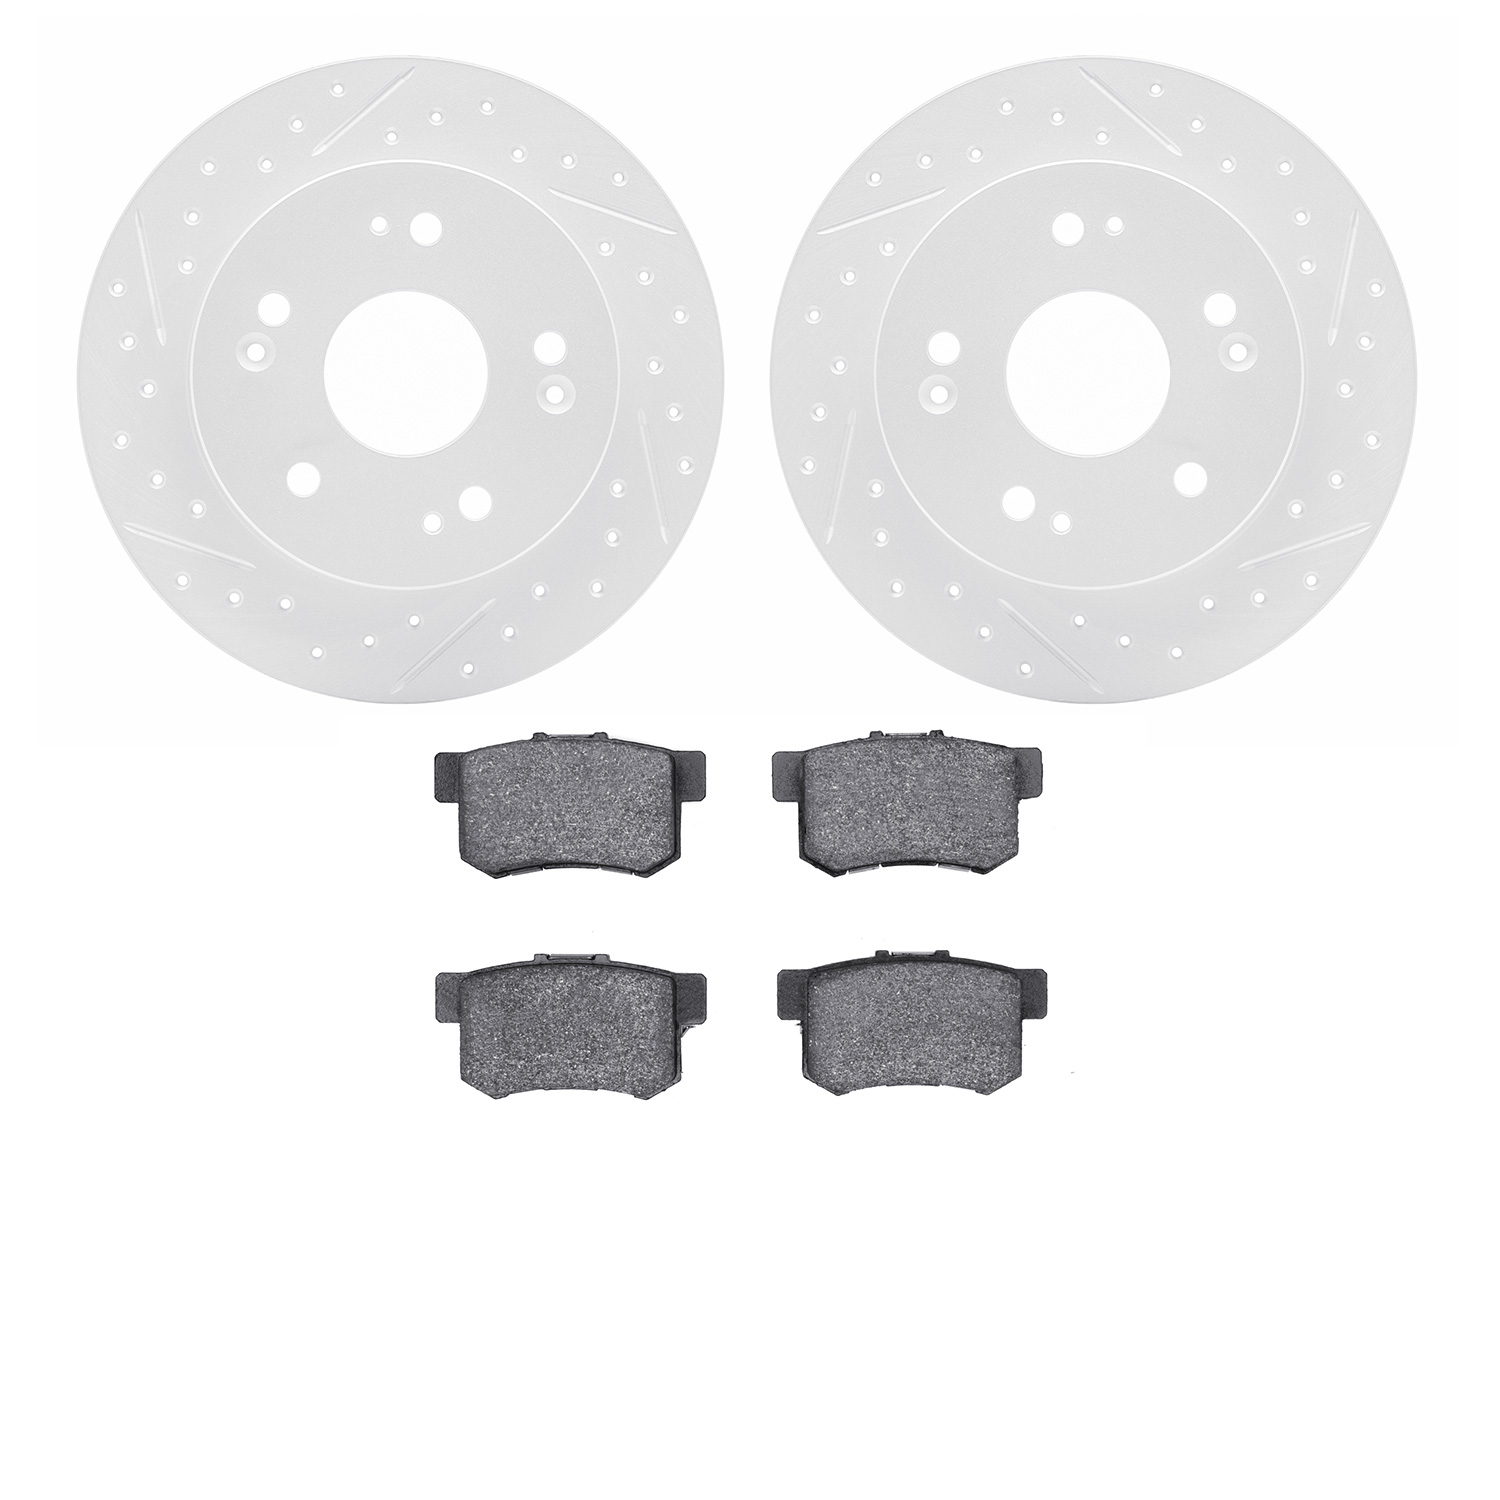 2502-59020 Geoperformance Drilled/Slotted Rotors w/5000 Advanced Brake Pads Kit, 1997-2015 Acura/Honda, Position: Rear